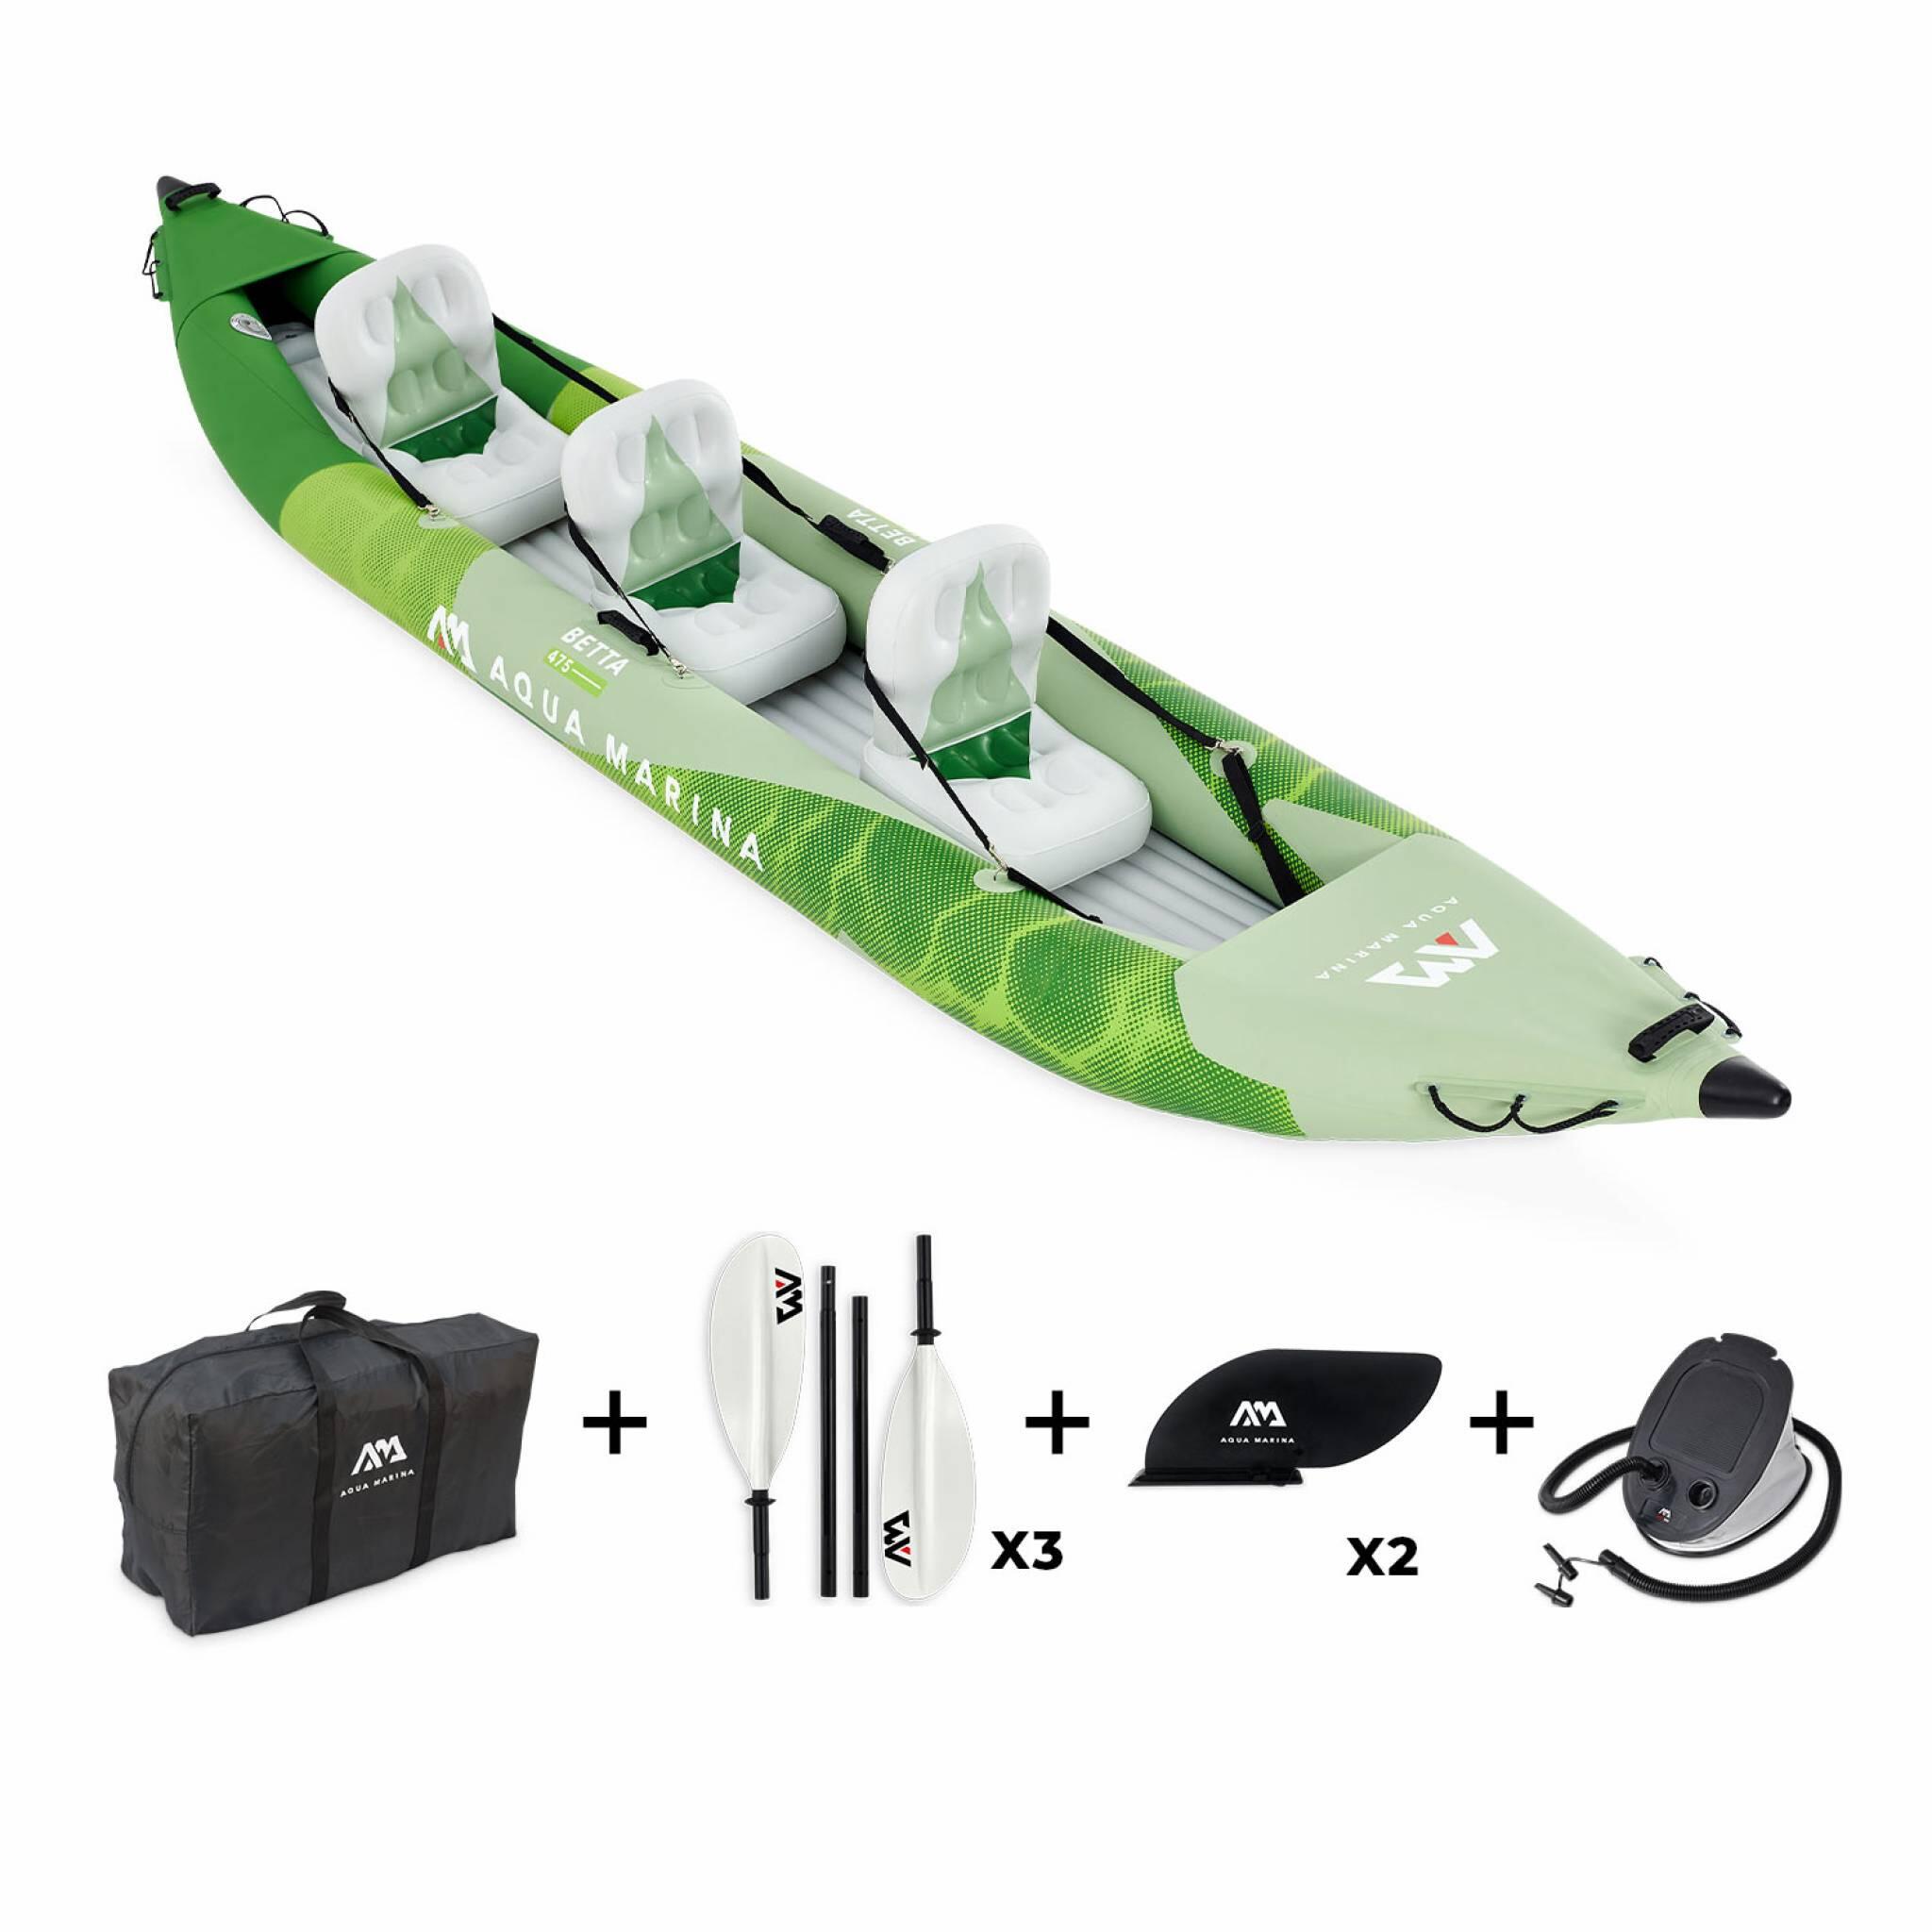 Aqua Marina BETTA 475cm 3 Person Inflatable Kayak Complete Package 5/7